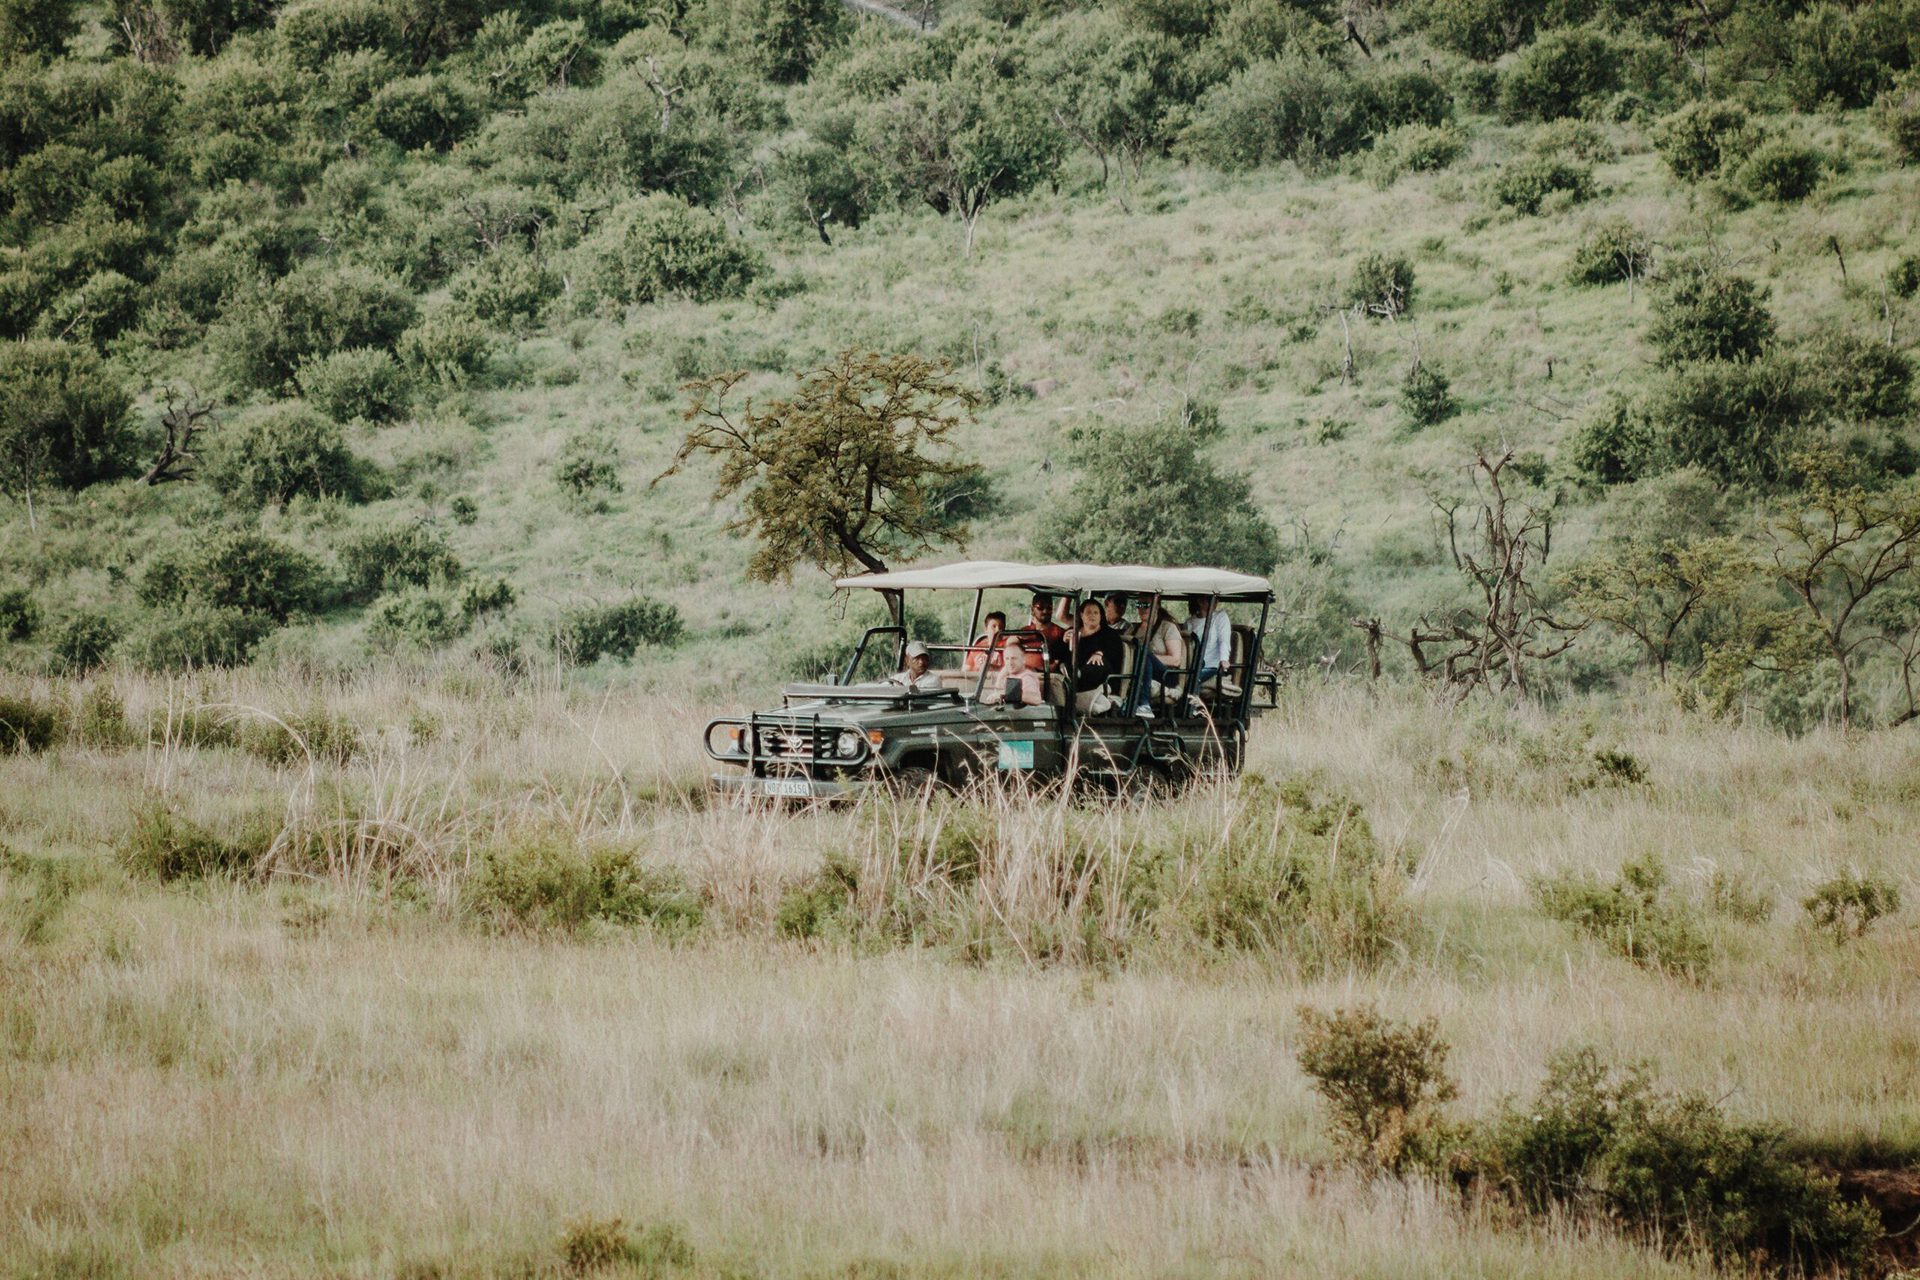 a group of people riding on the back of a green bus.